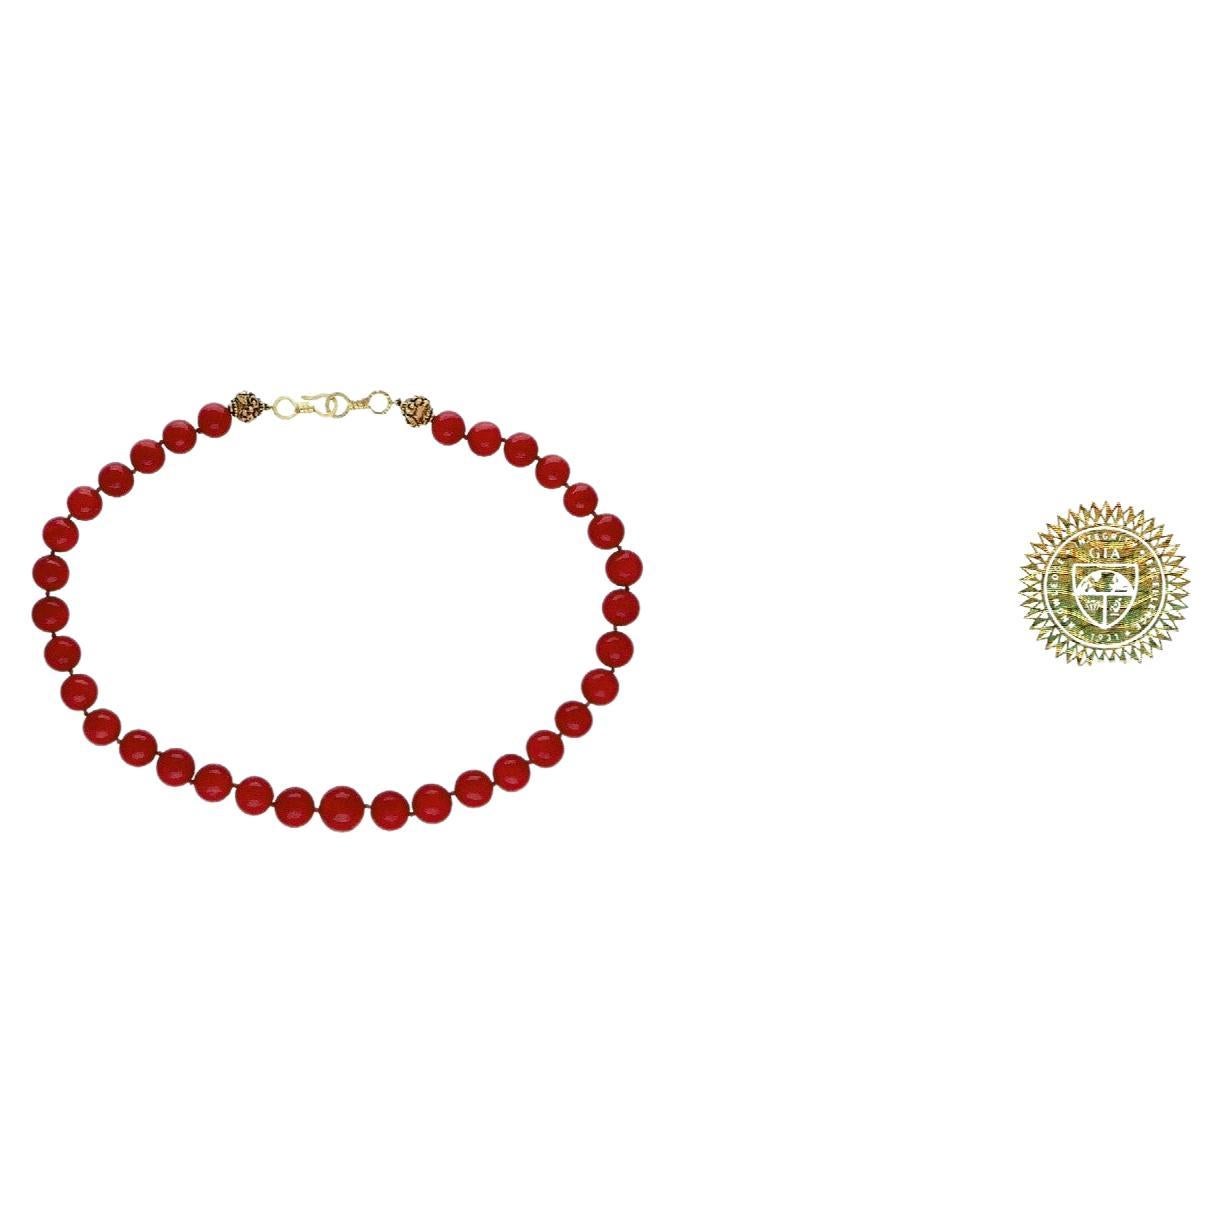 Vintage GIA Certified Natural No Dye 18k Solid Yellow Gold Red Coral Bead Strand Necklace Estate Fine Jewelry

GIA Certificate # 2235192707
No indication of dye
Semi Translucent
Orange -Red
Spectacular 18K solid gold necklace with sphere beads, no